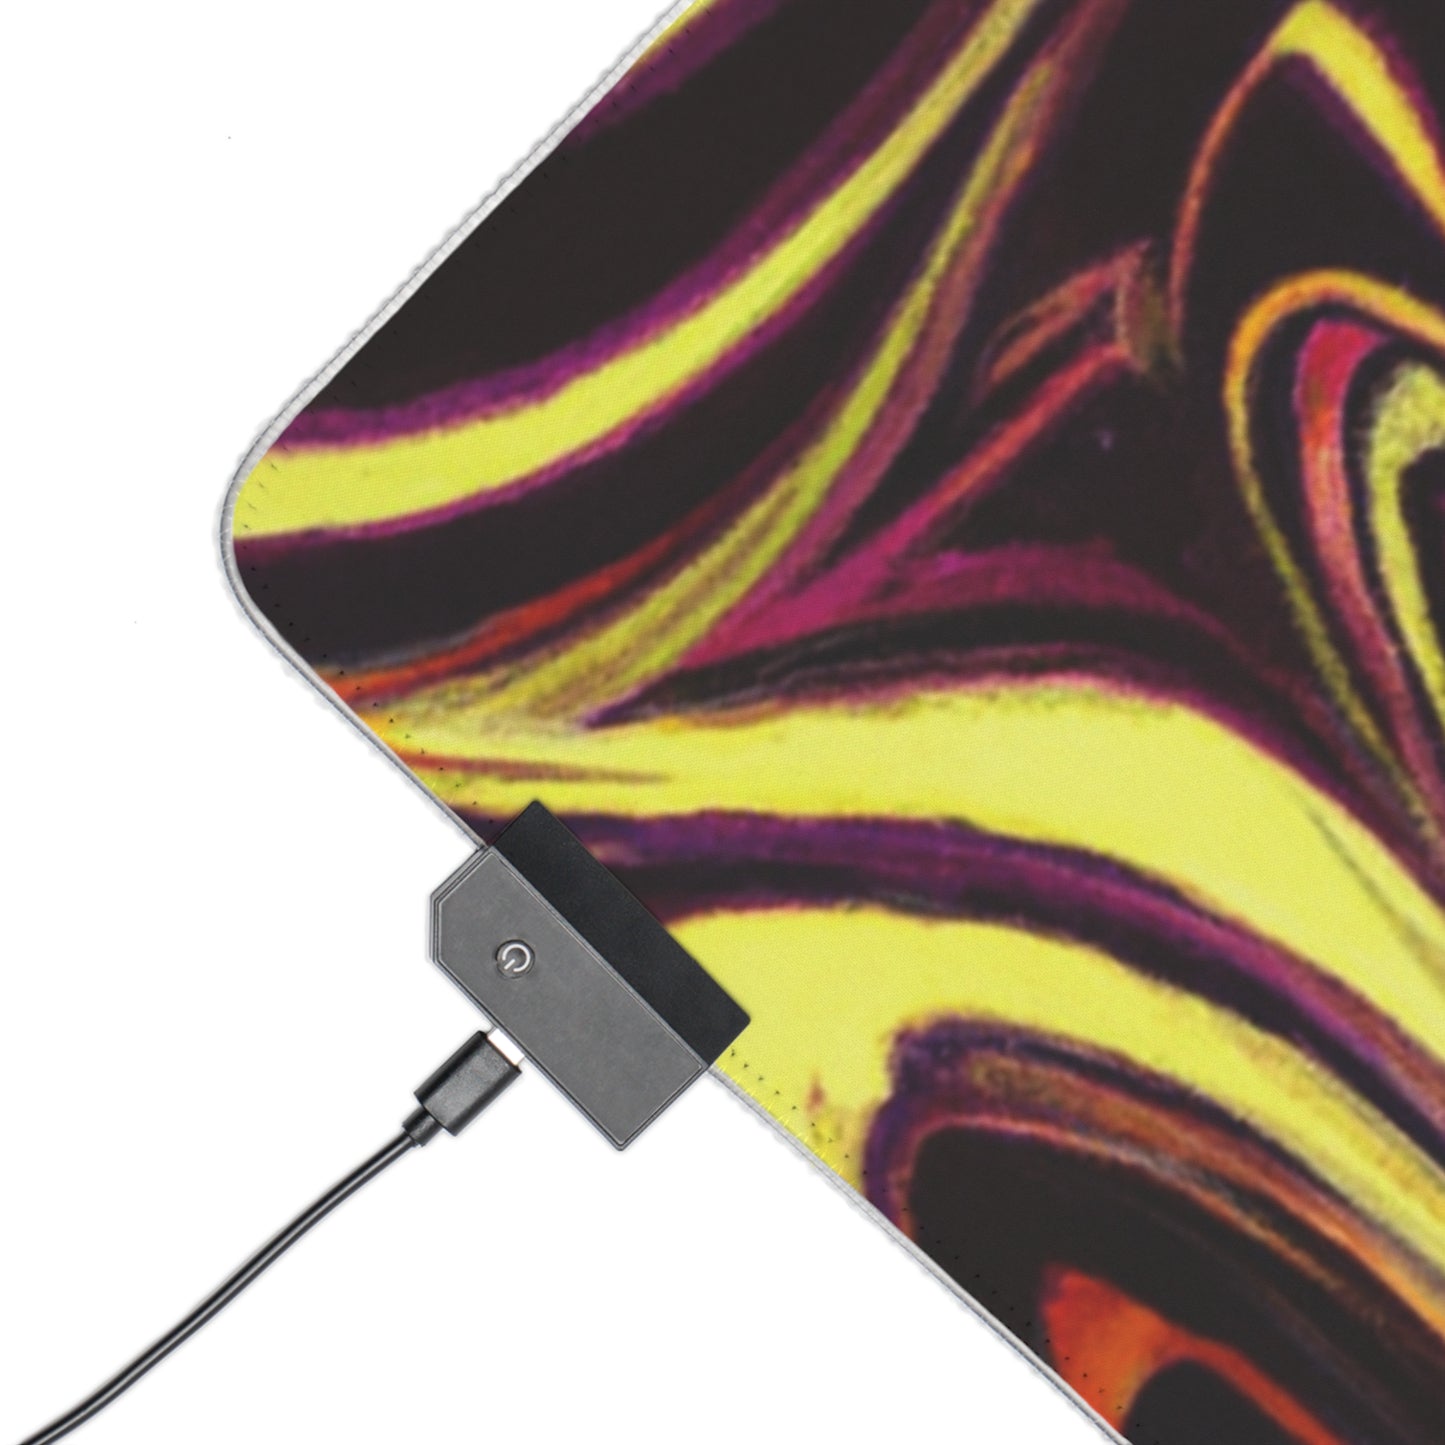 .

Joanie the Jetsetter - Psychedelic Trippy LED Light Up Gaming Mouse Pad